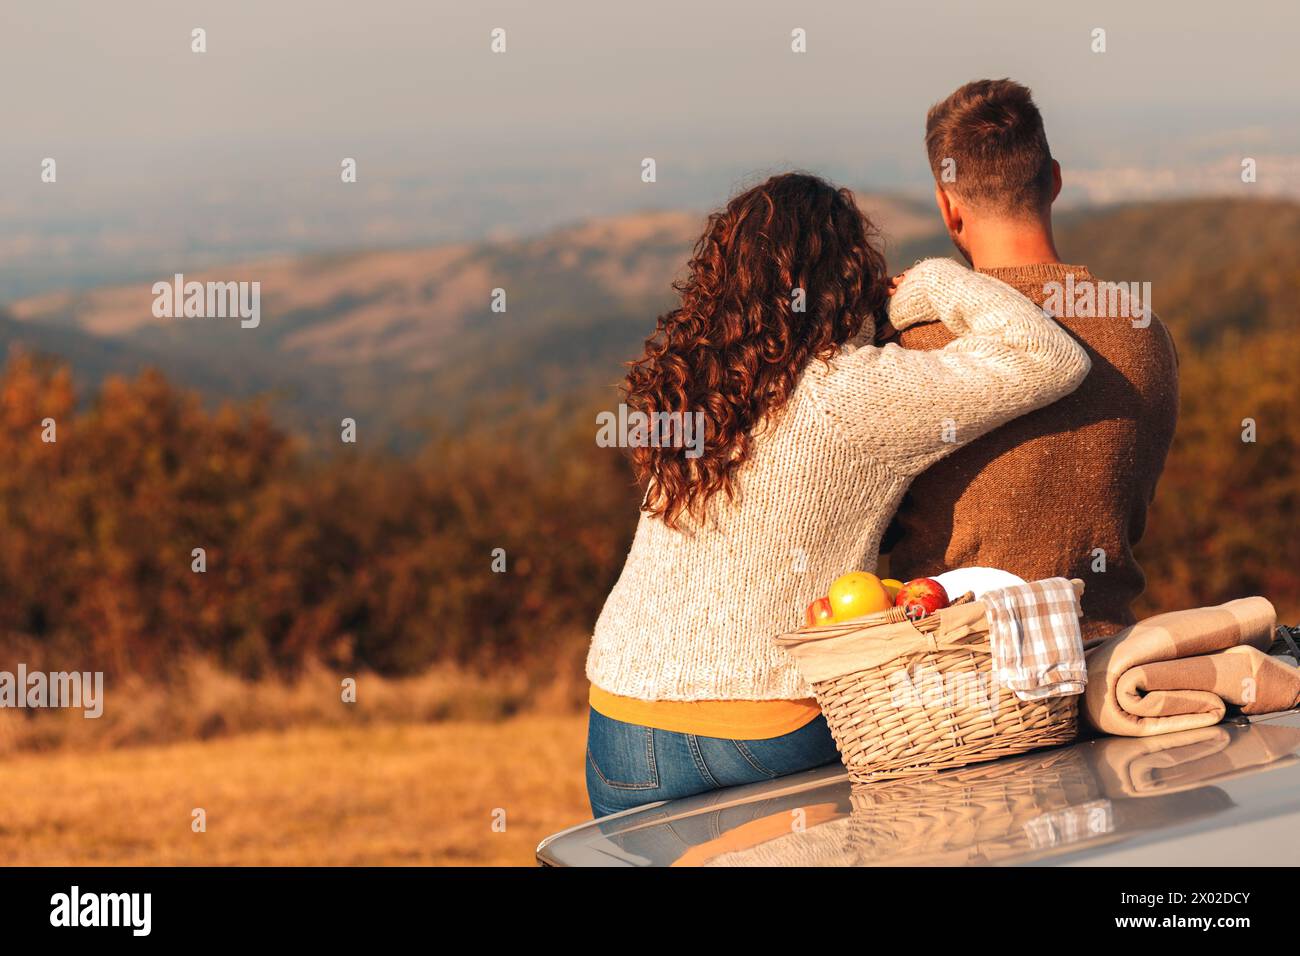 Rear view of couple enjoying picnic time on the sunset. They are sitting on old fashioned car and looking at distance. Stock Photo